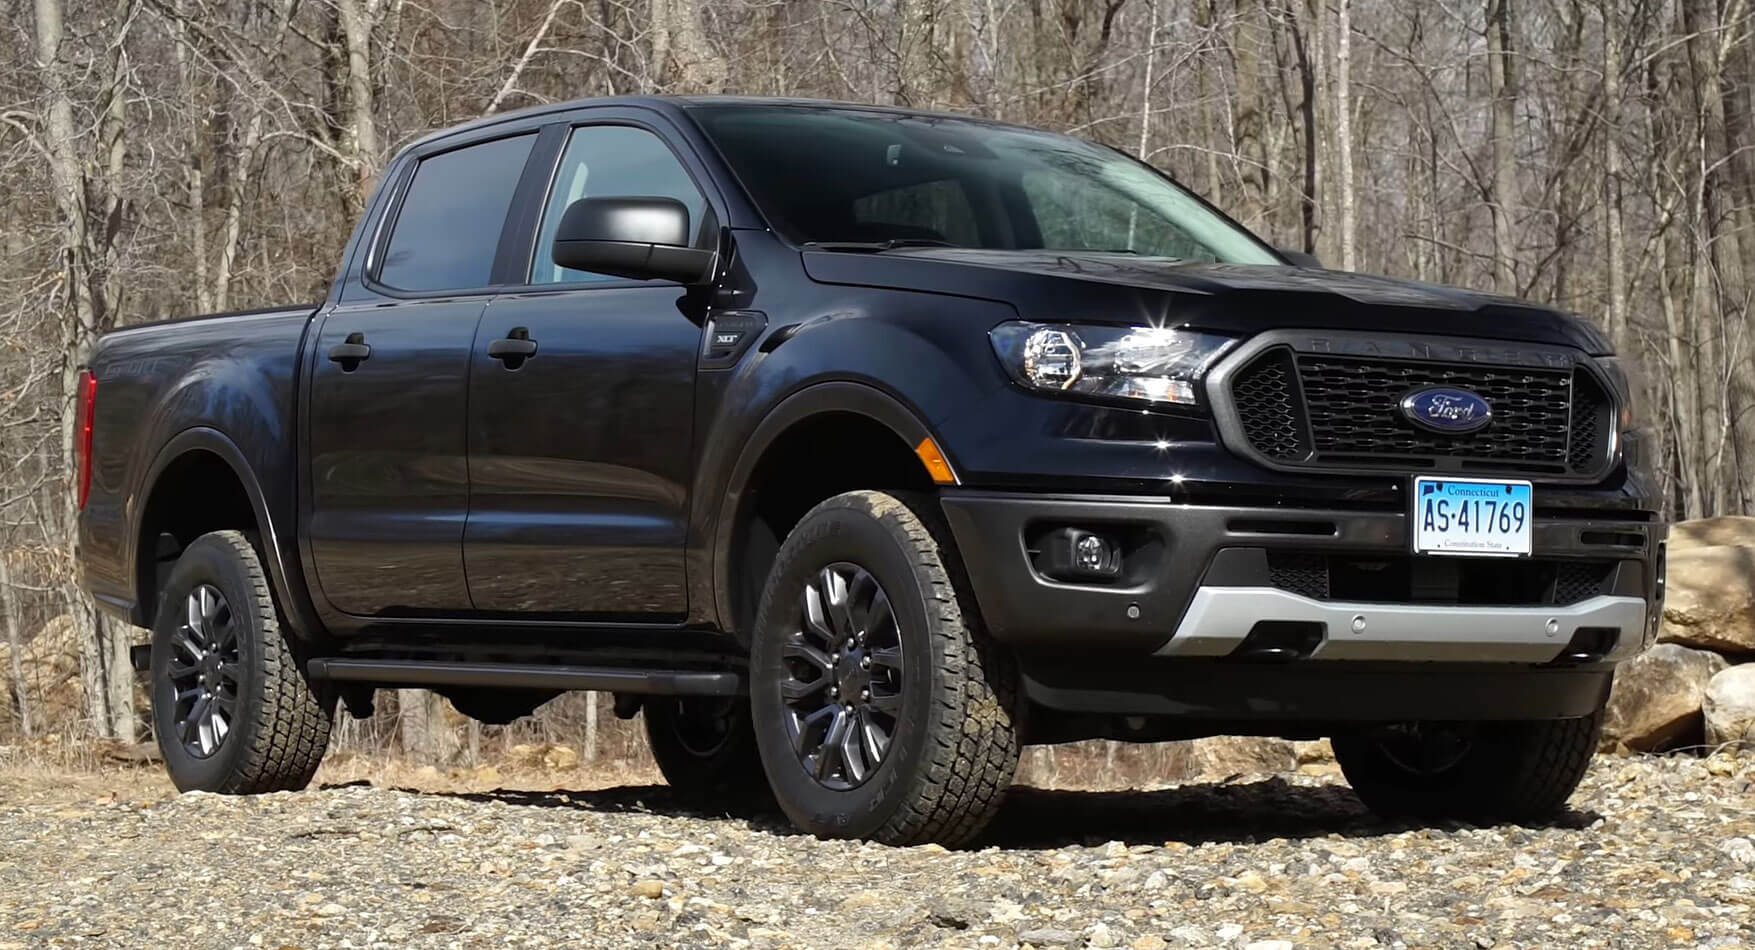 Consumer Reports Gets Its Hands On 2019 Ford Ranger 2.3L Turbo | Carscoops